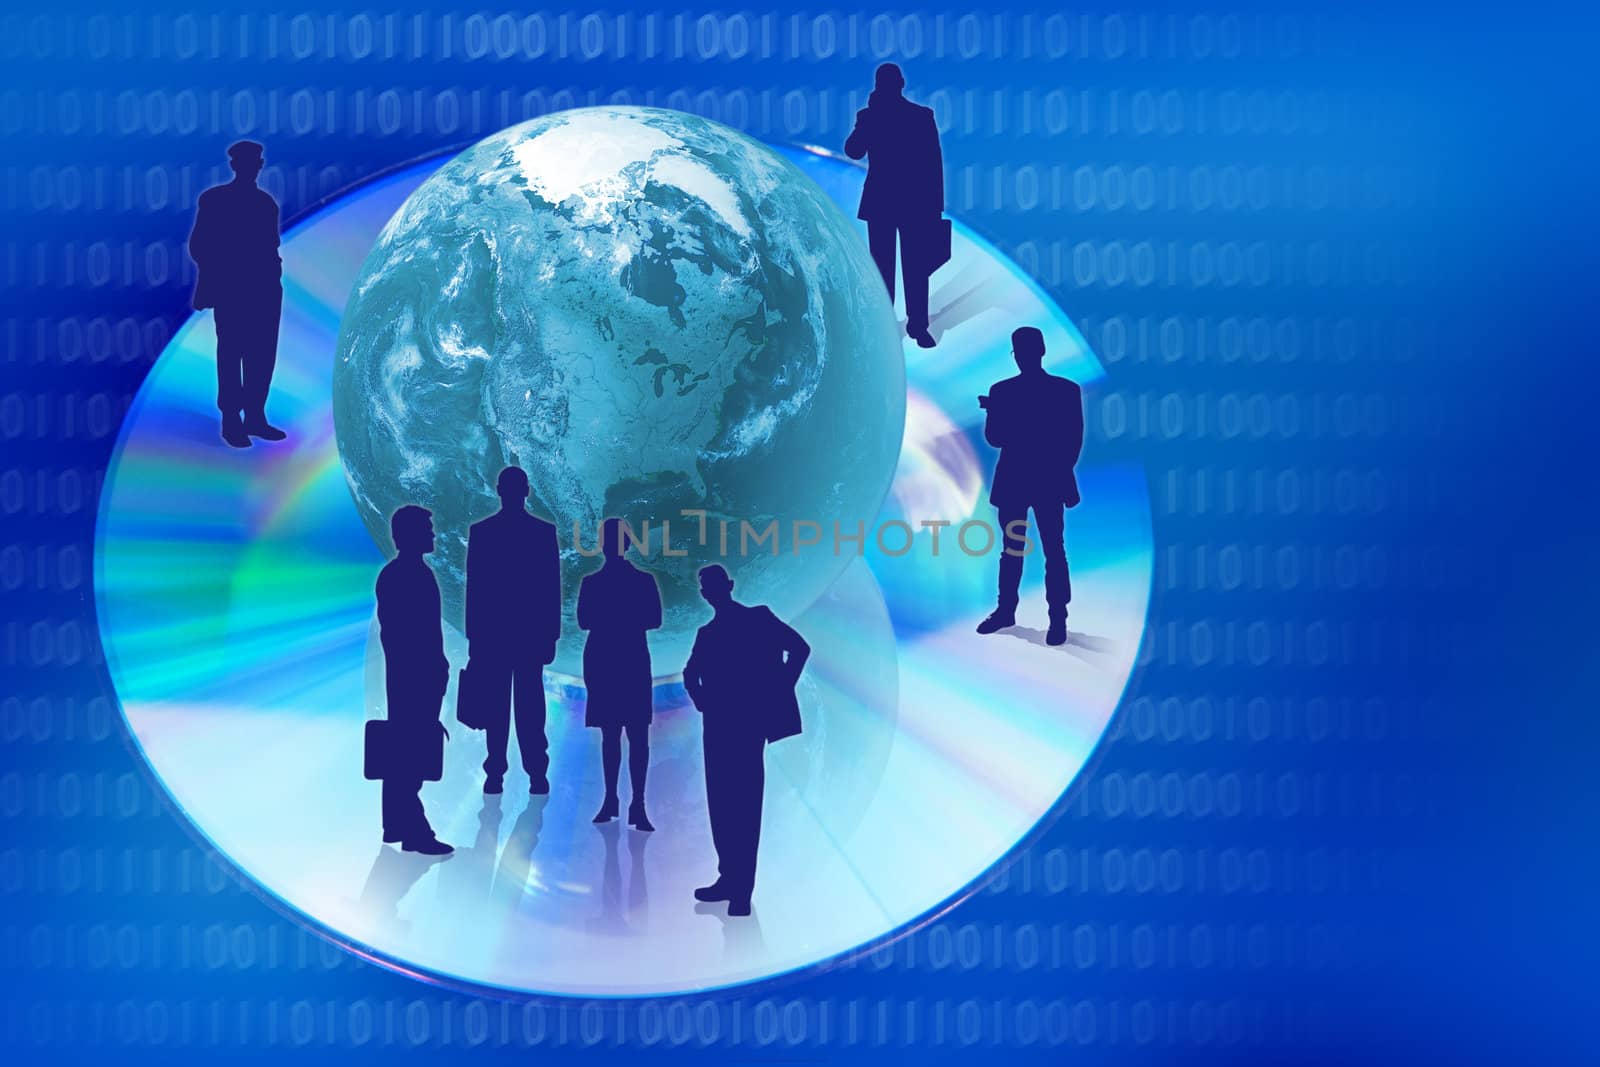 Compact disk with globe and business people silhouettes in blue colors.